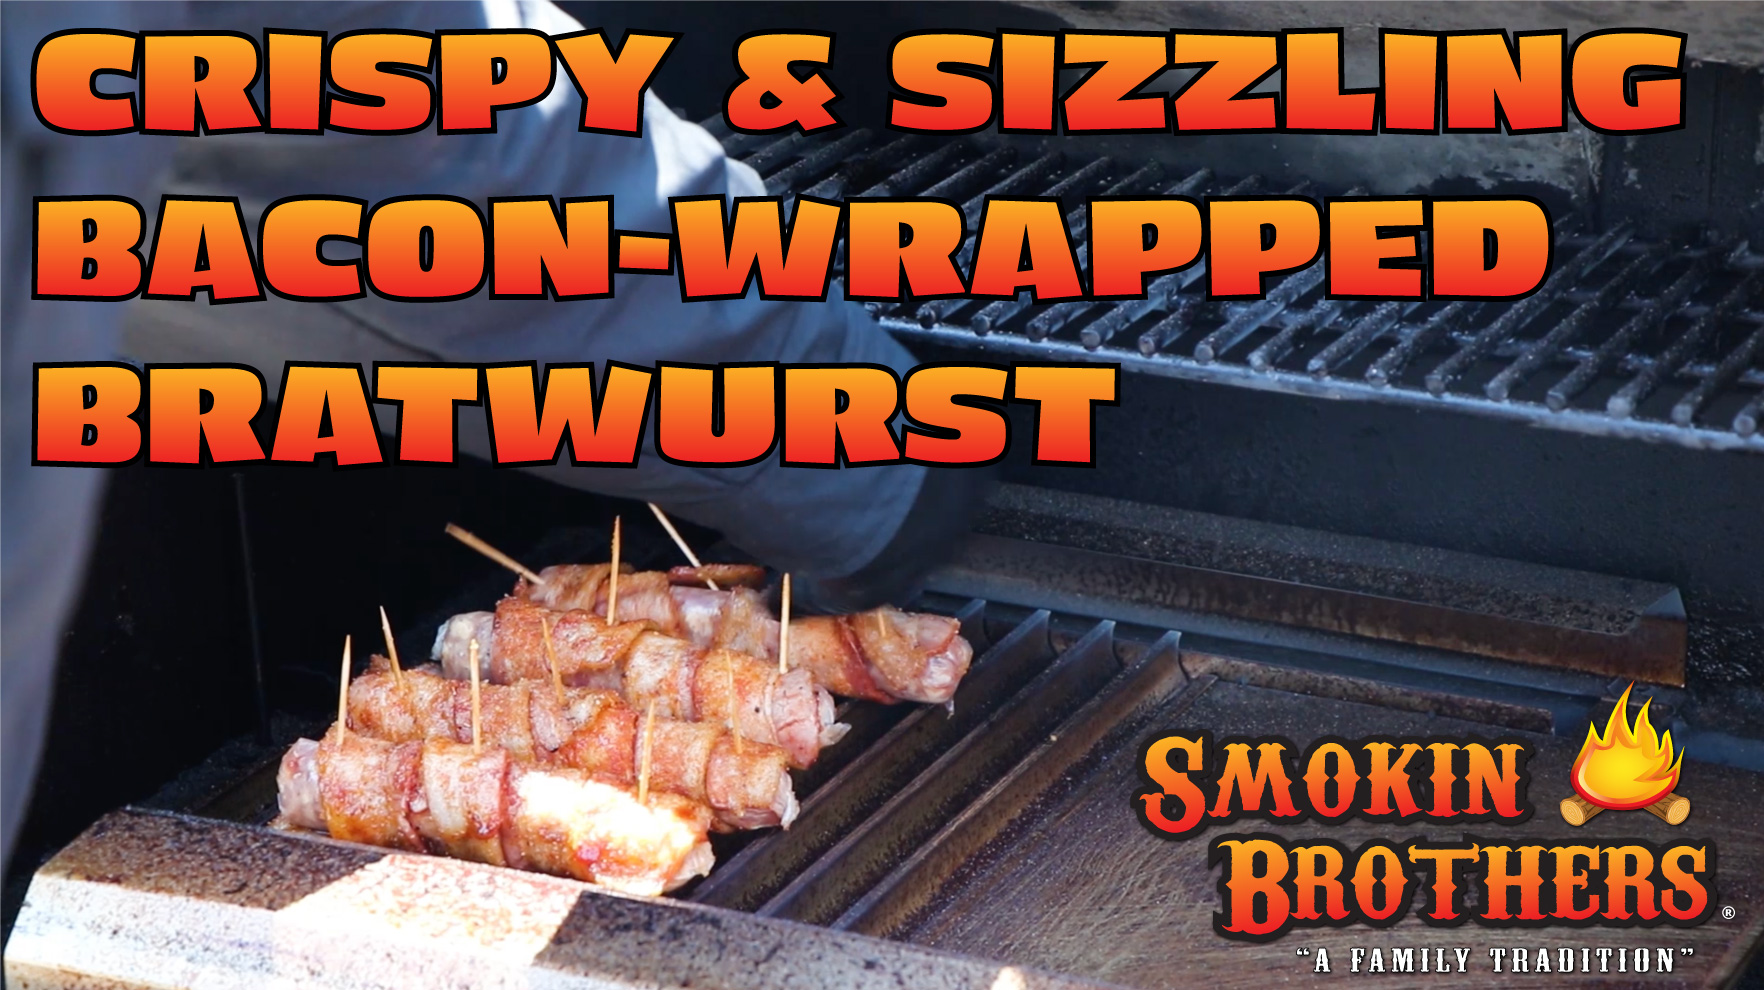 Crispy & Sizzling Bacon-Wrapped Bratwurst on a Pellet Grill